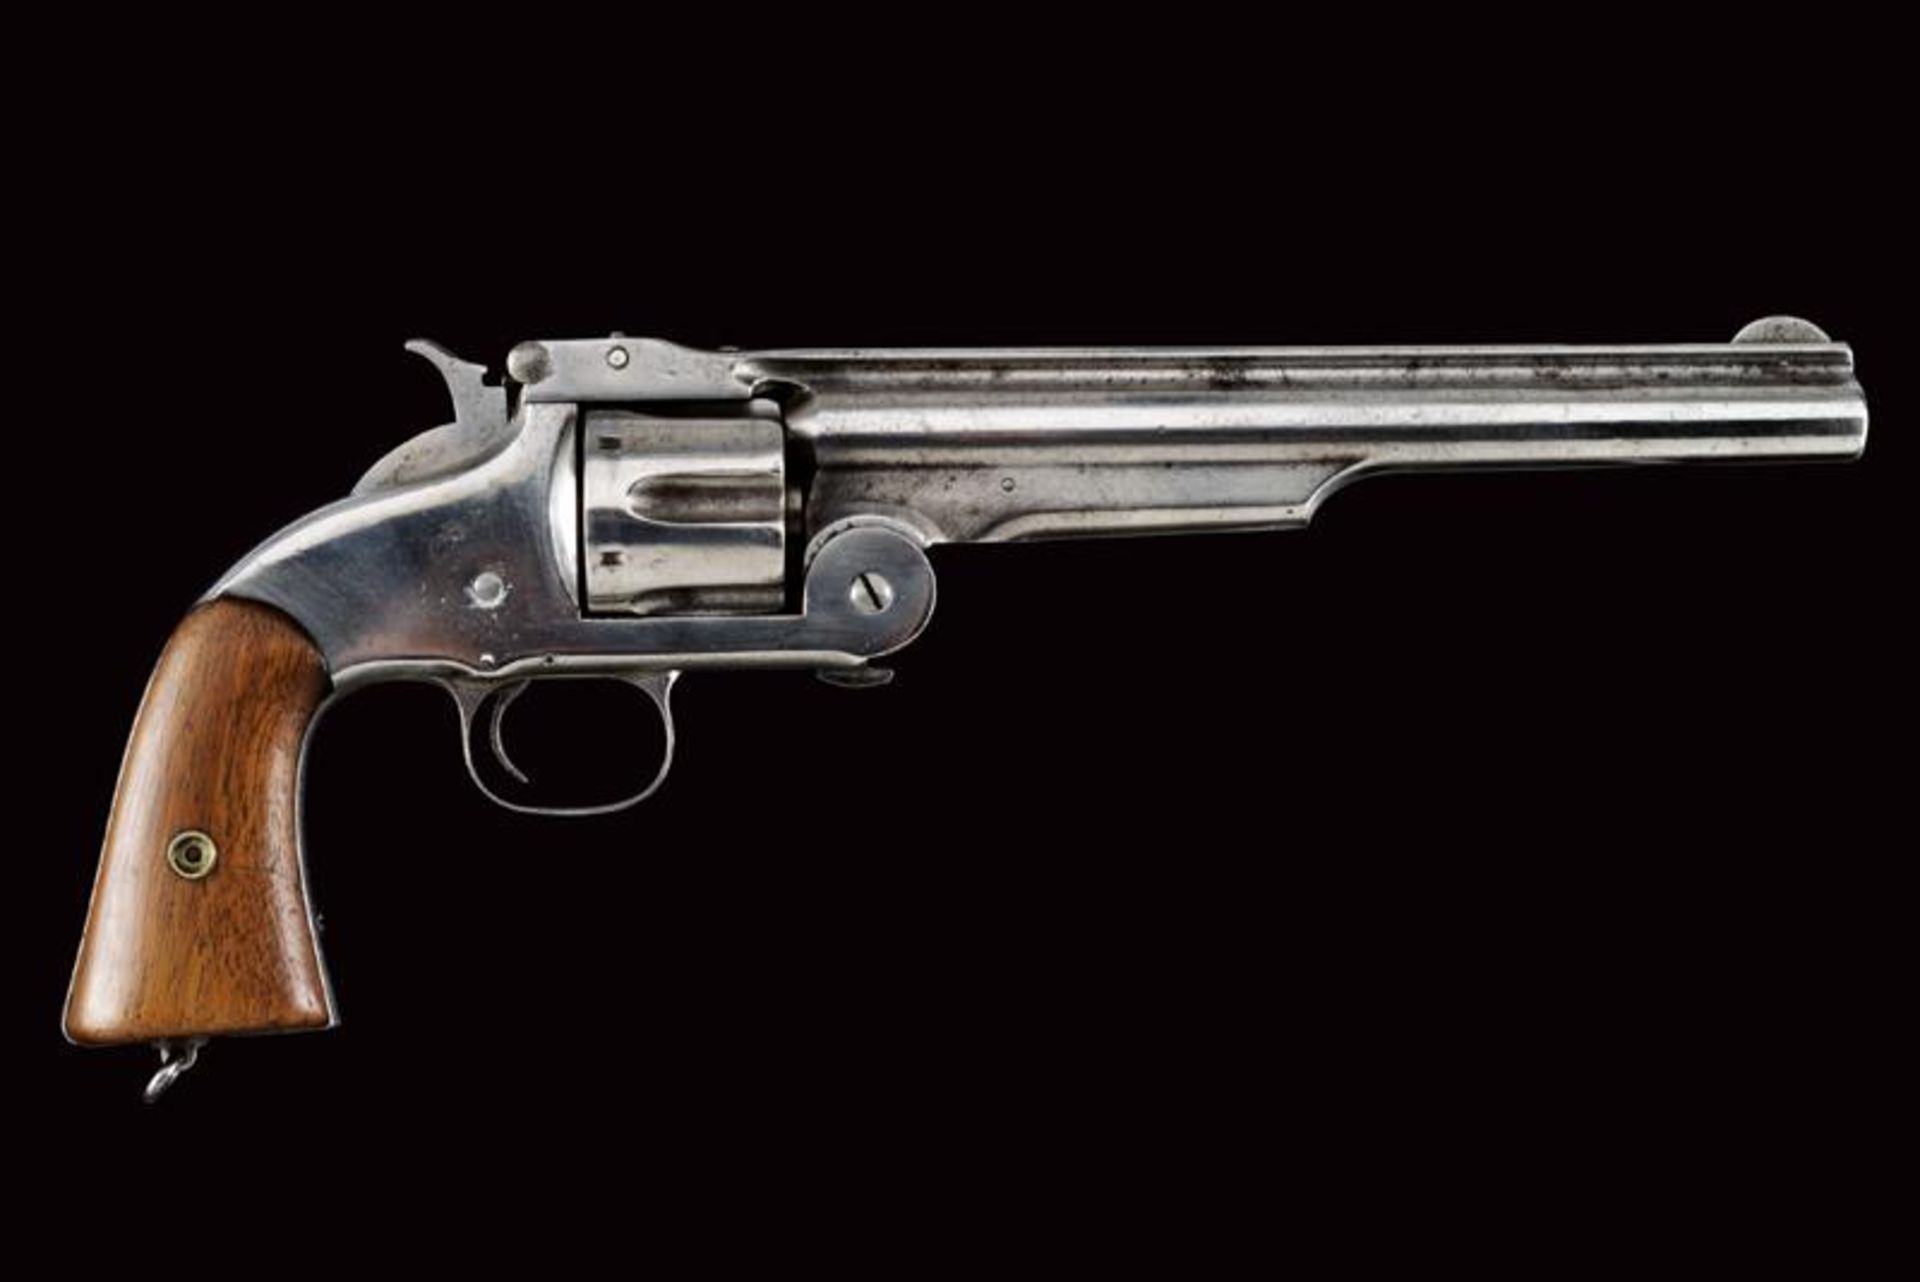 A rare S&W Model 3 Russian First Model revolver (Old Old Model Russian) - Image 7 of 7